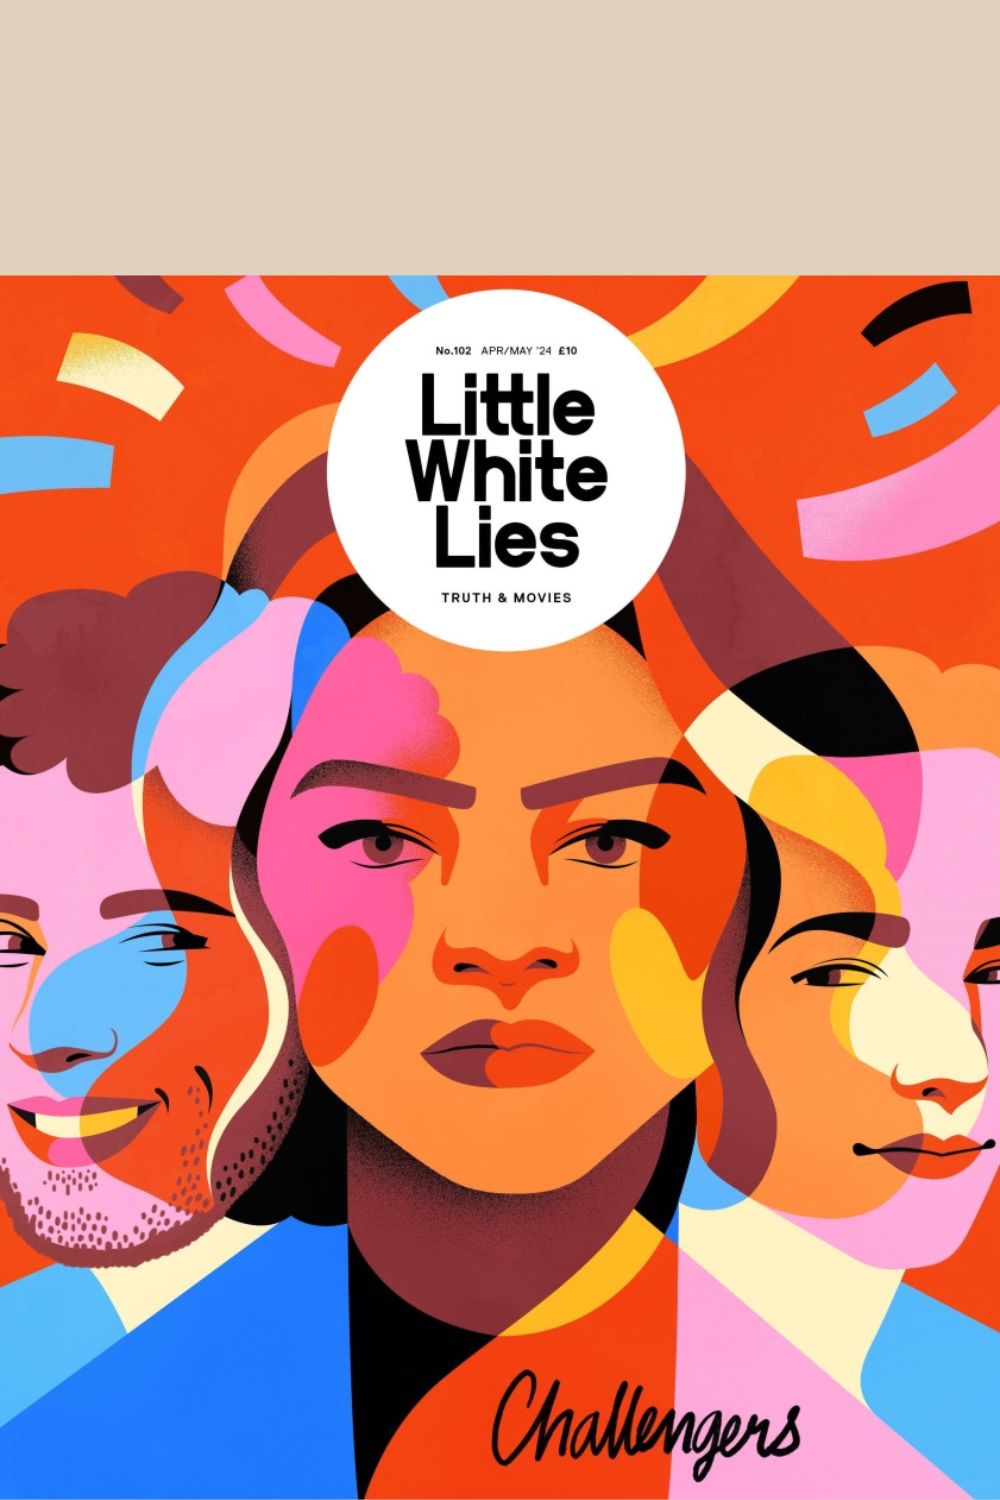 Little White Lies Issue 102 cover (bright illustrations of the cast of the Challengers movie)